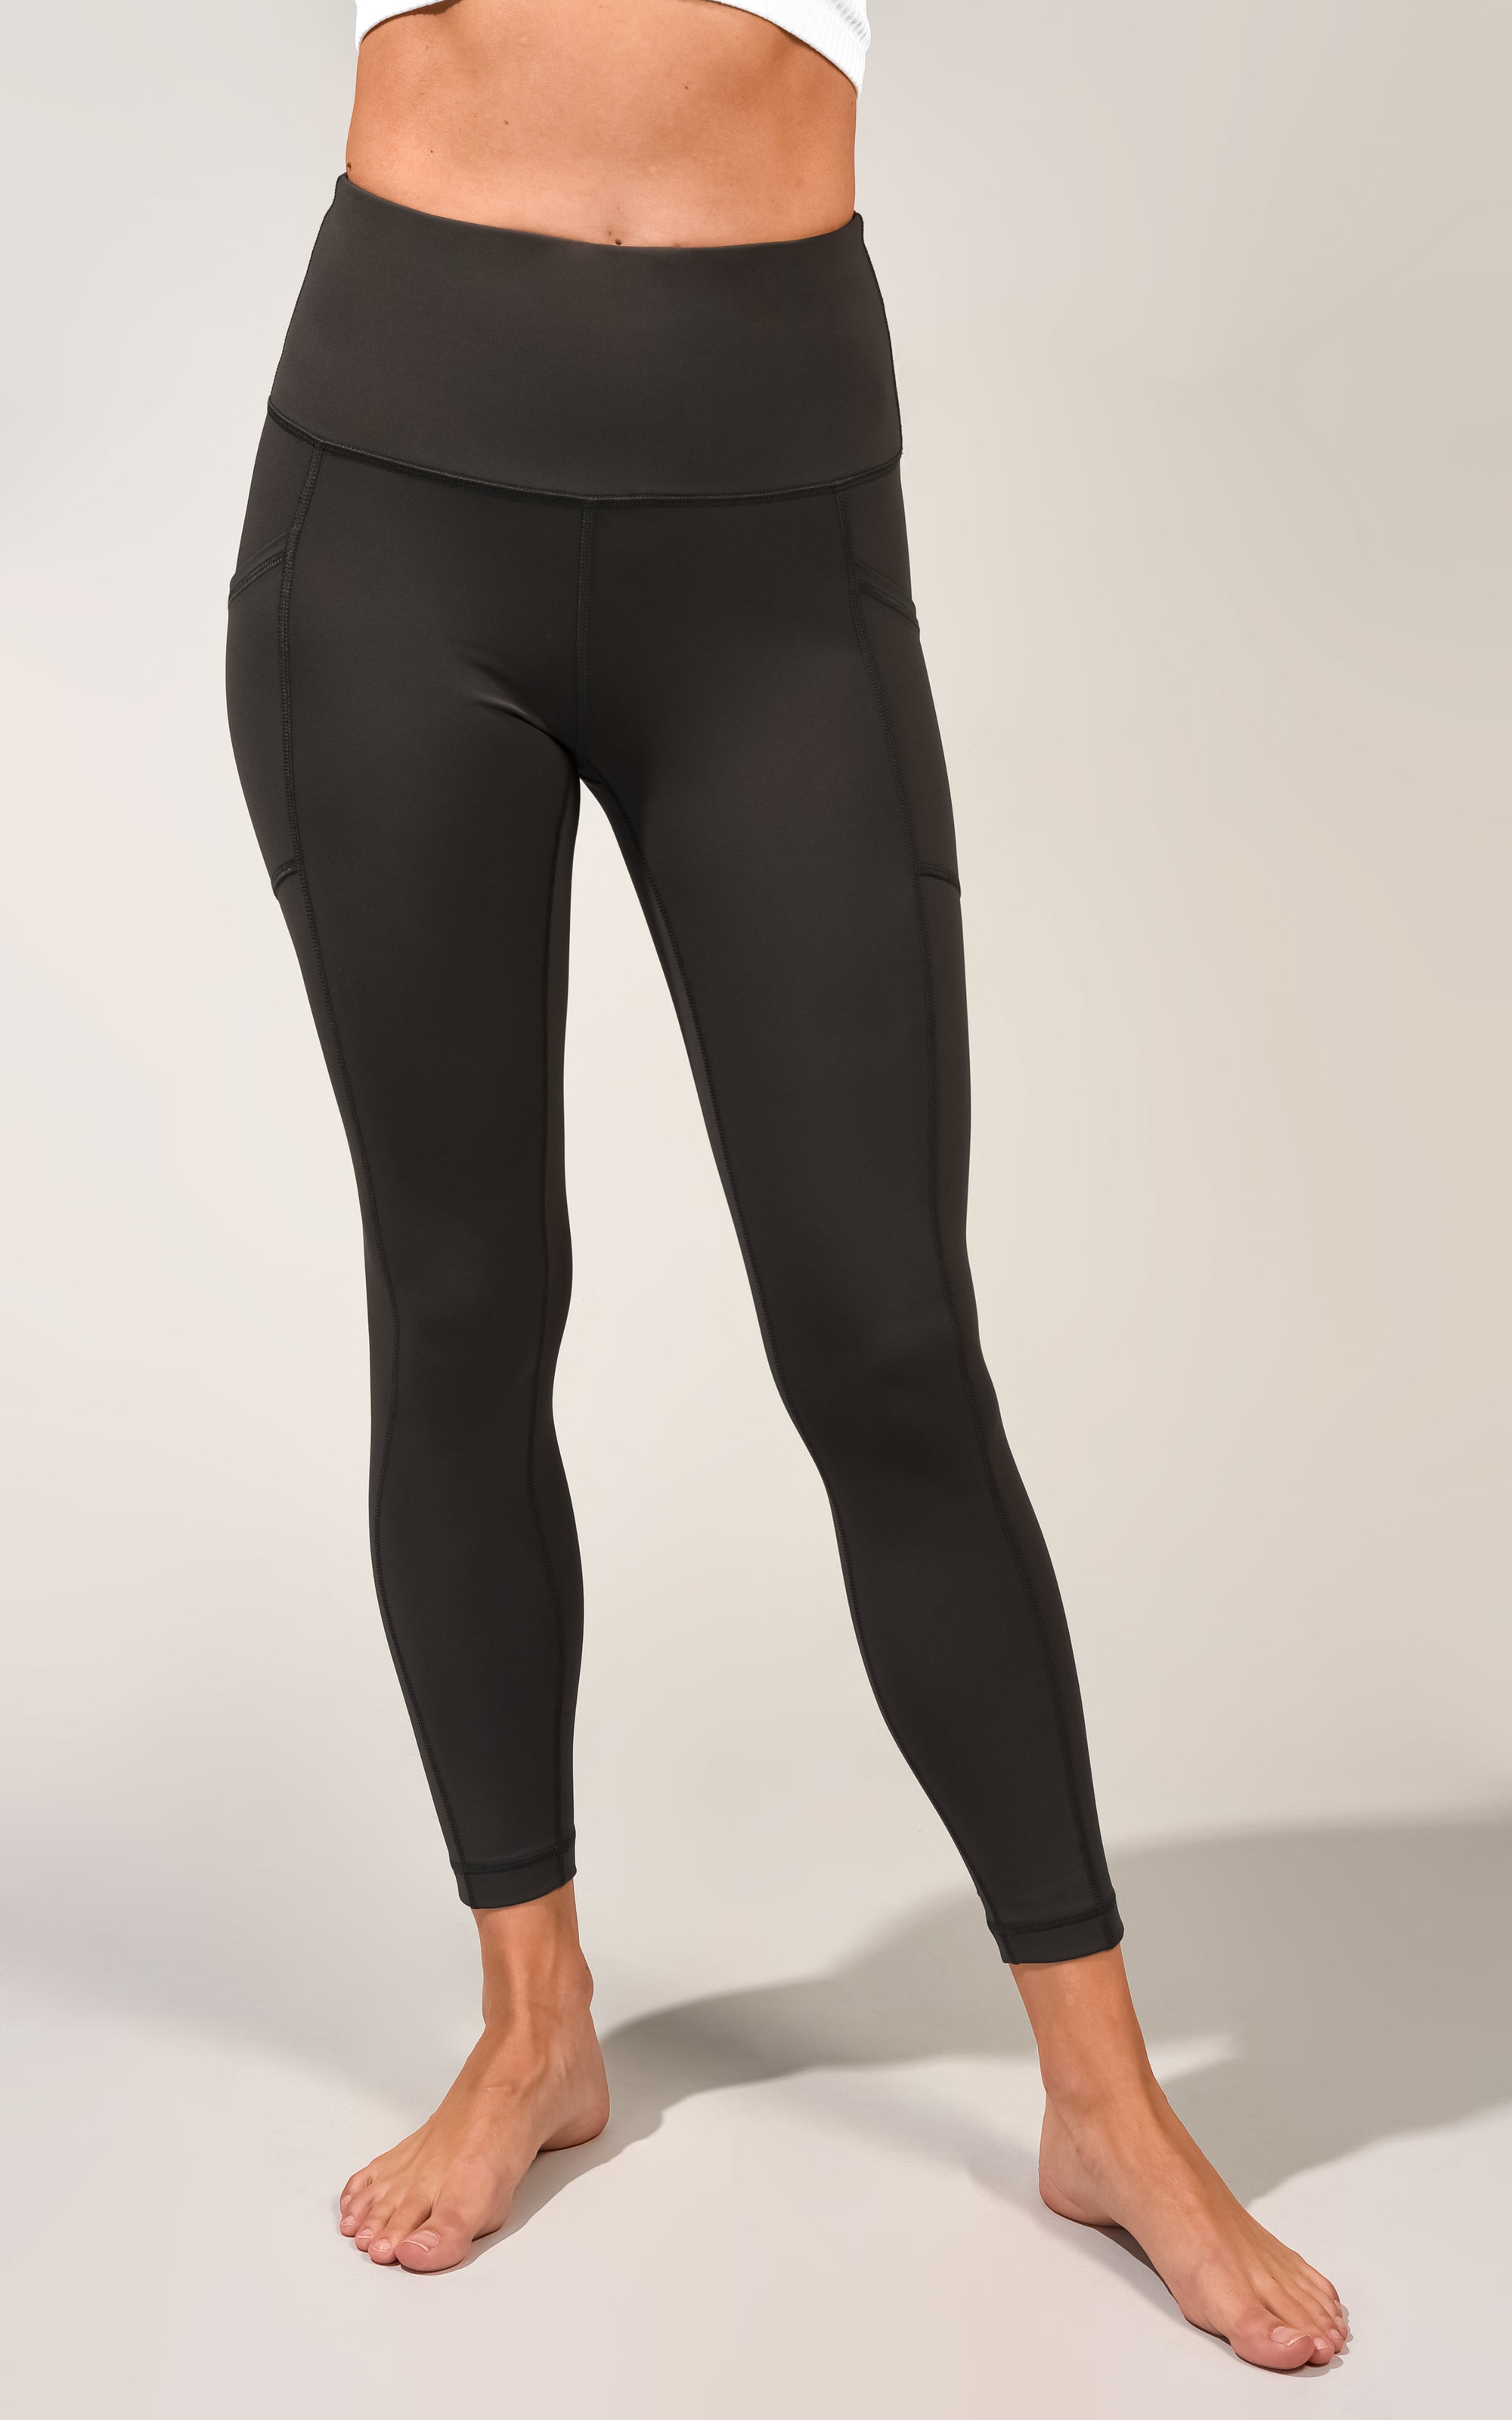 90 Degree By Reflex Carbon Interlink High Waist Crossover Ankle Legging -  Black - X Small